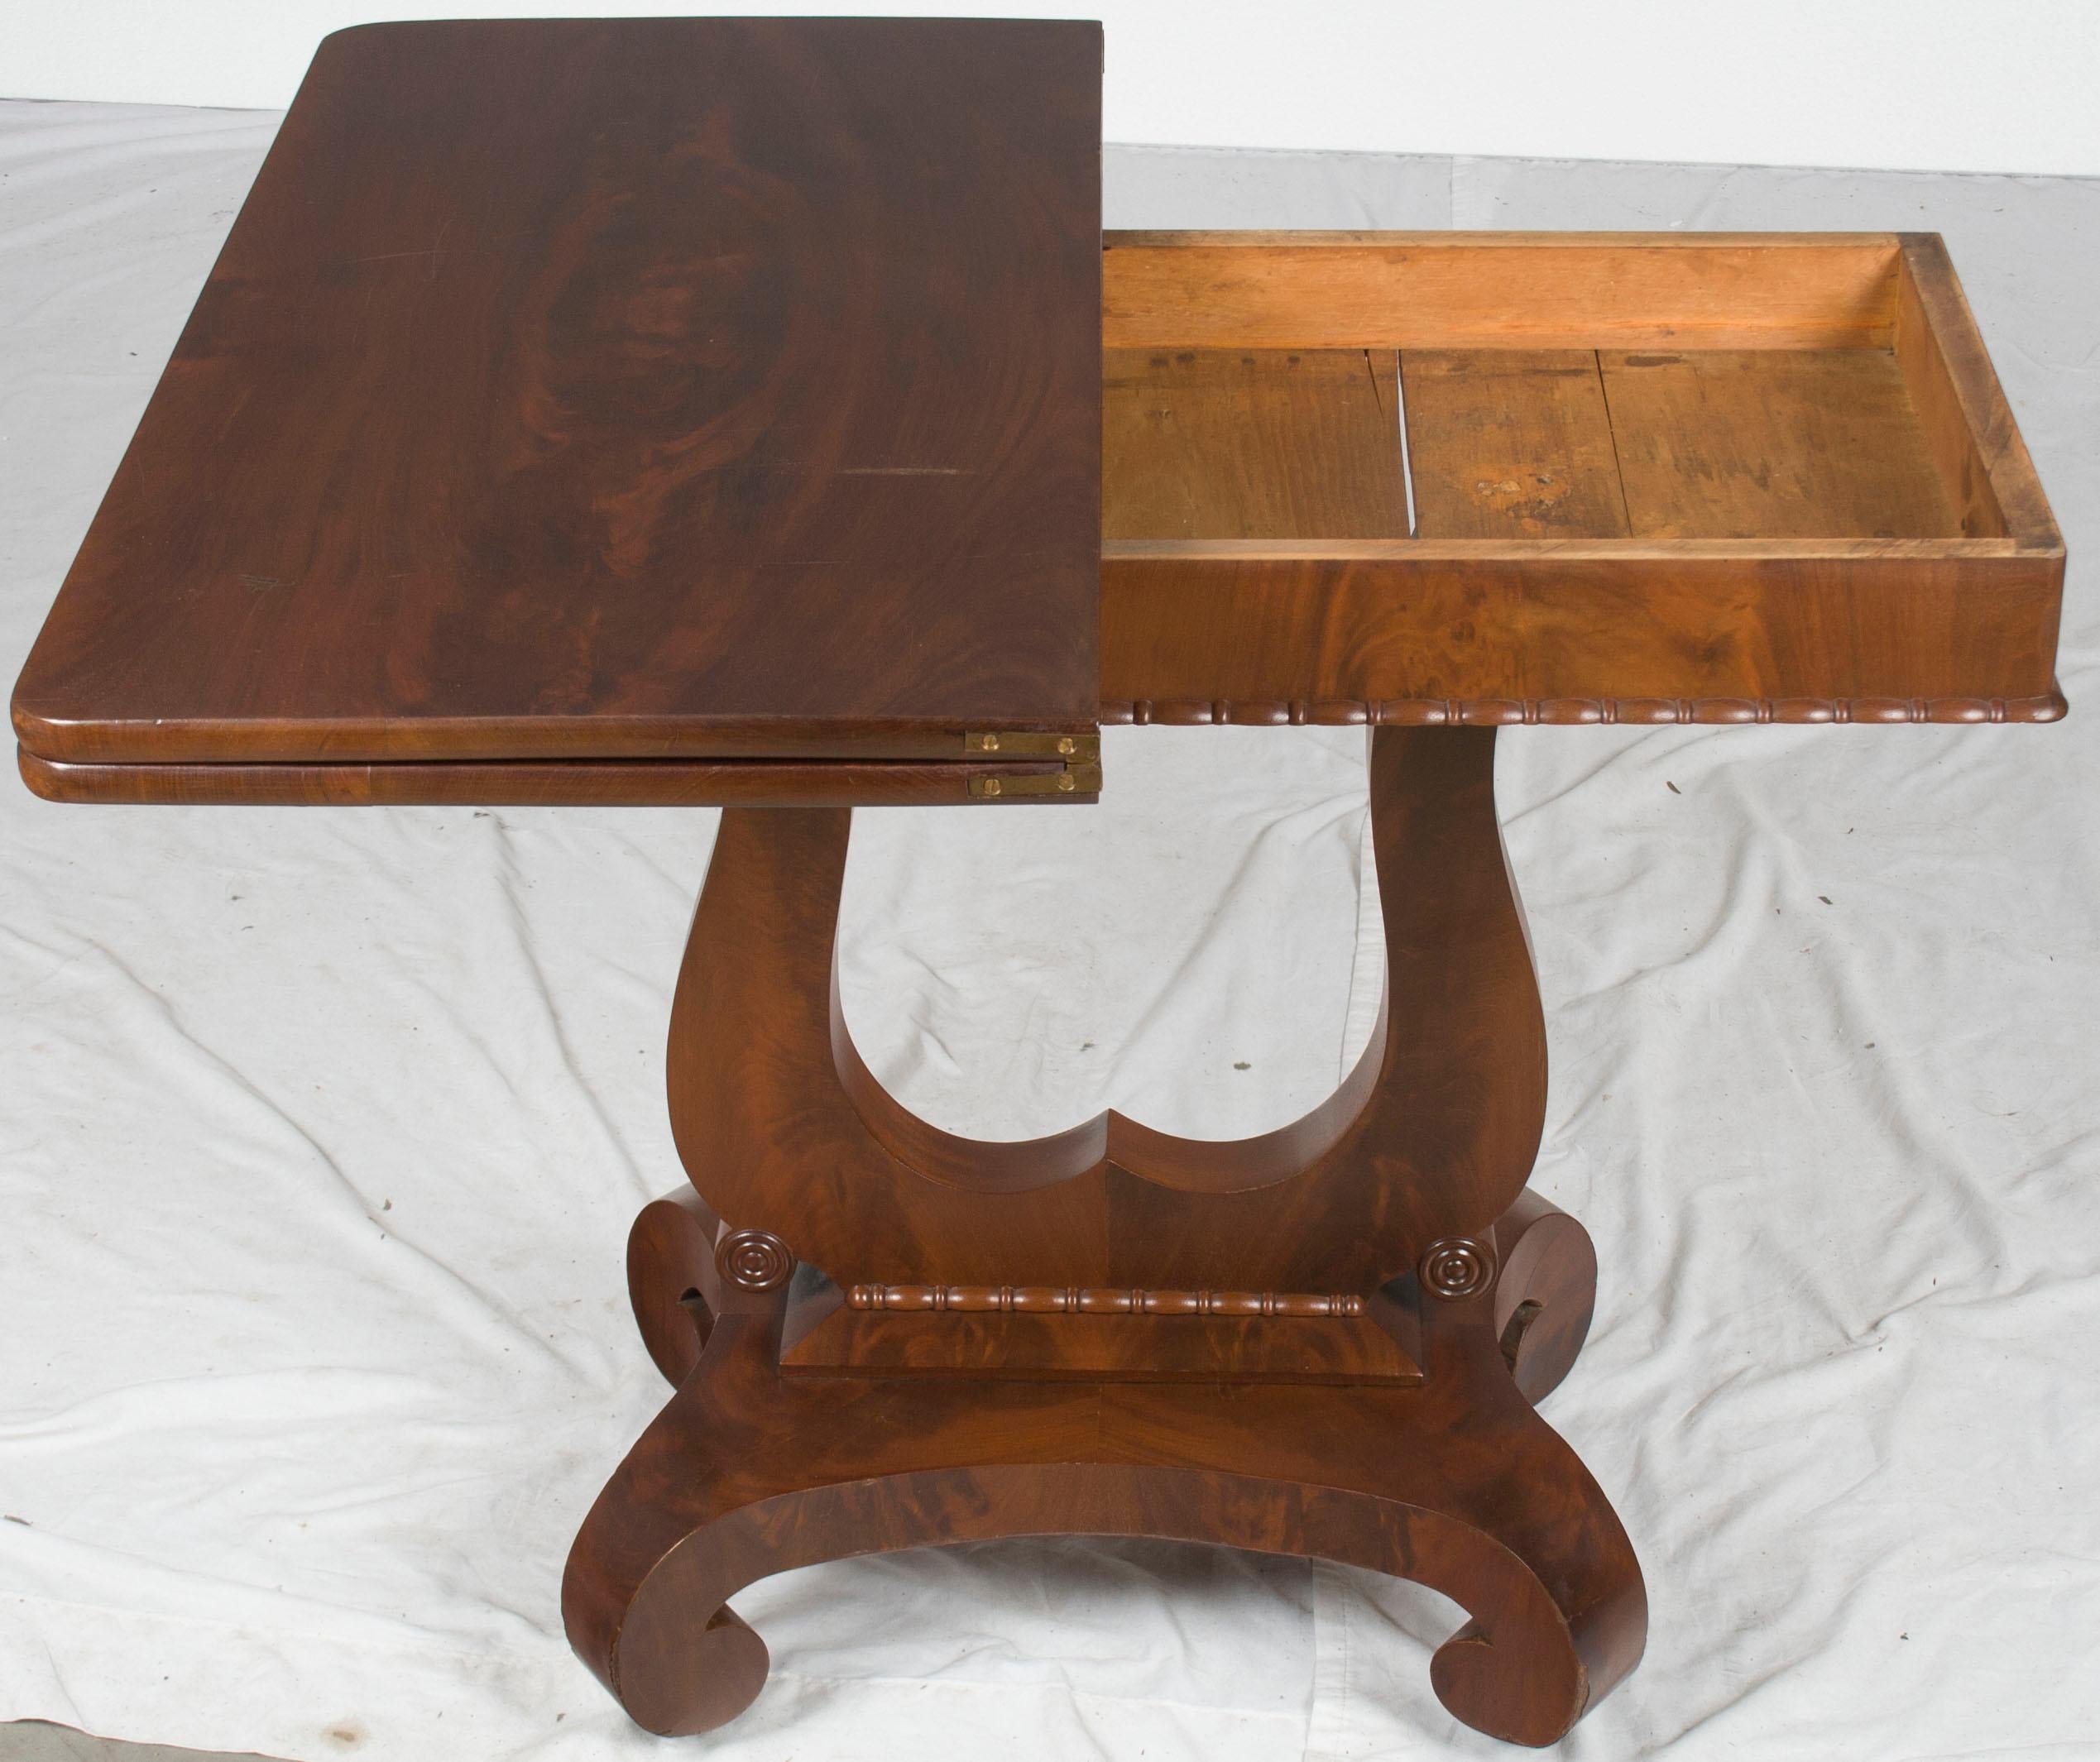 This classic antique flip top game table is from England and was made sometime around 1890. It is made from a lovely flame mahogany wood and remains in good condition today.

The main feature of this table is, of course, the flip top. While closed